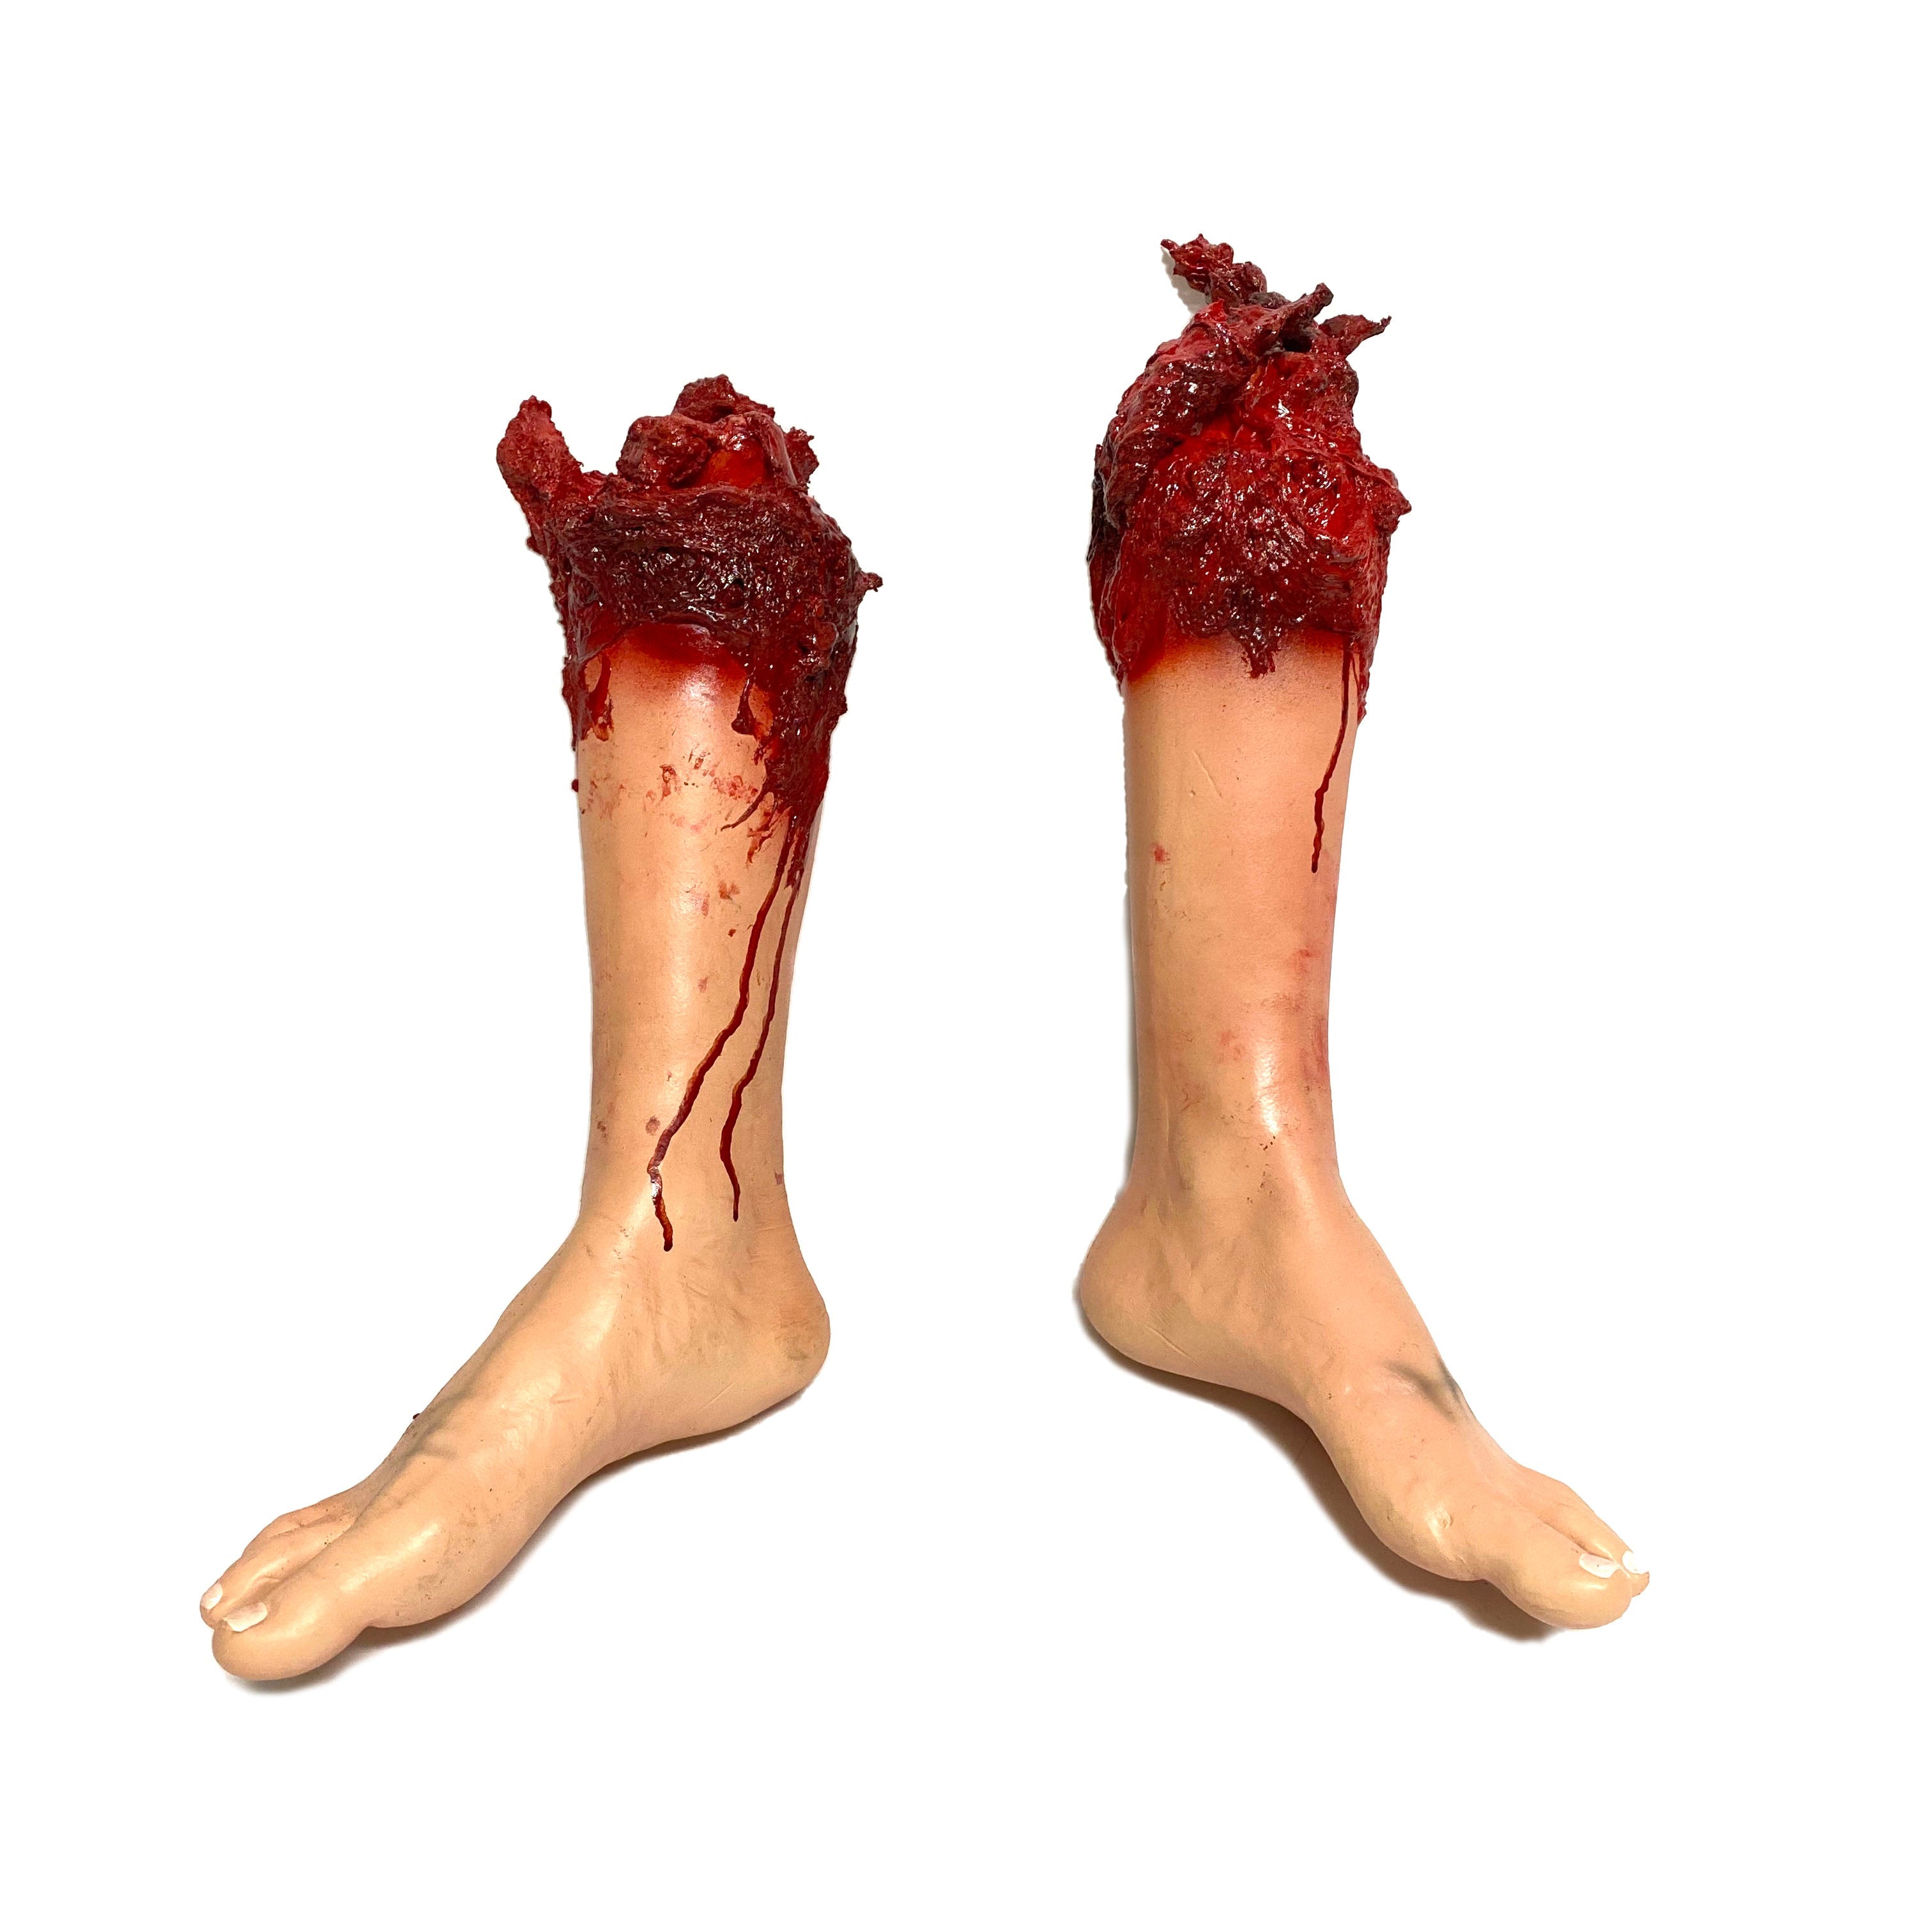 Severed Leg - Foam Rubber with Gore Effects - Pair - Both Legs